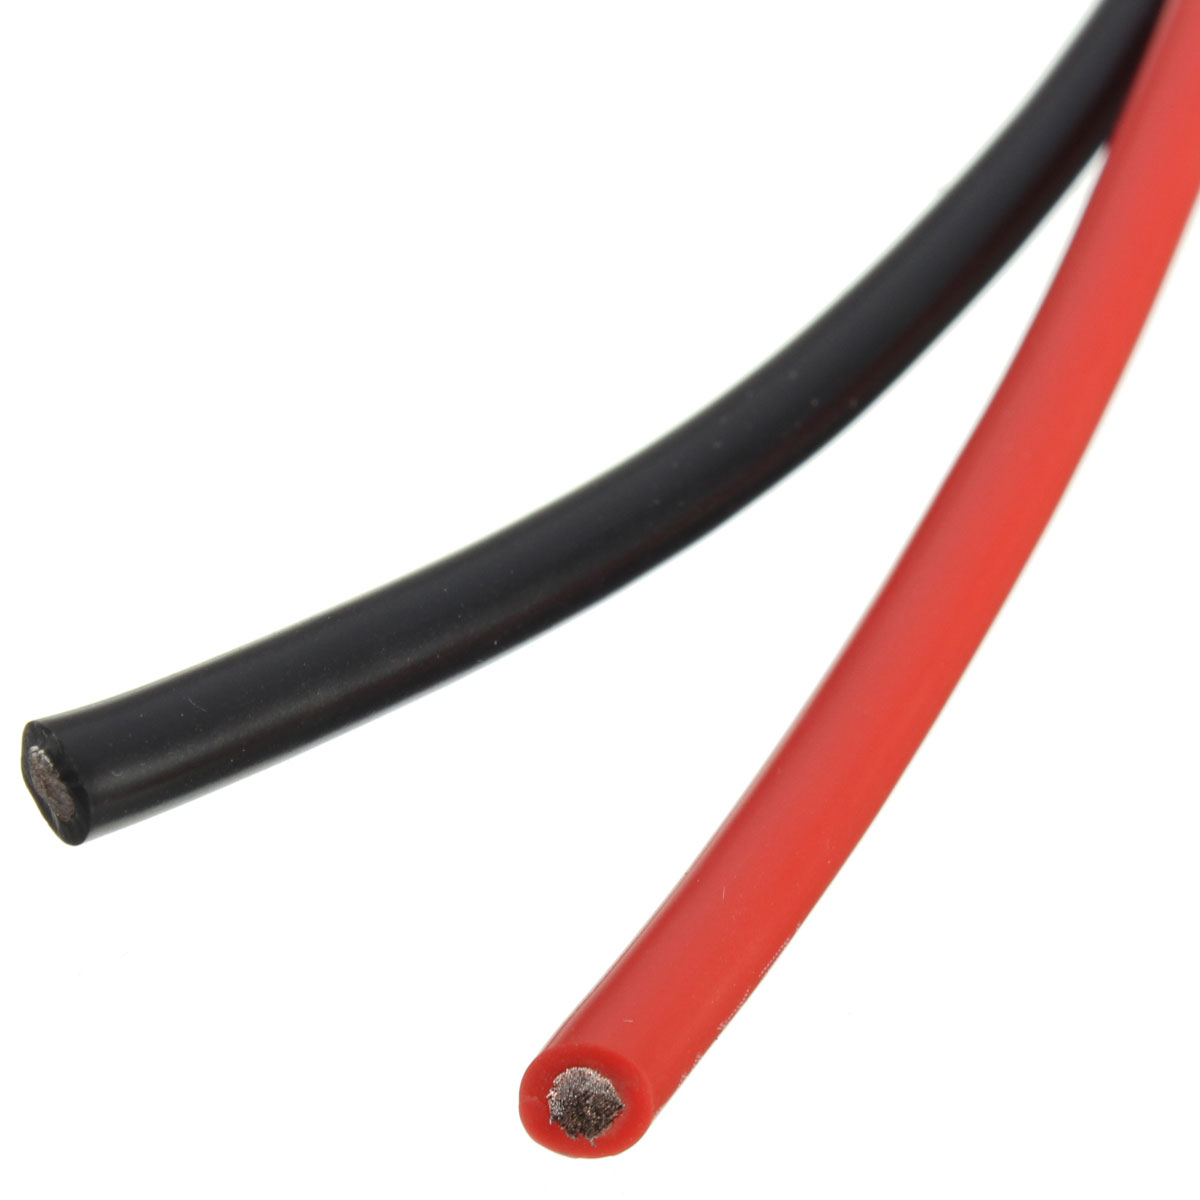 12AWG-3m-Gauge-Silicone-Wire-Flexible-Stranded-BlackRed-Copper-Cable-F-RC-983012-8